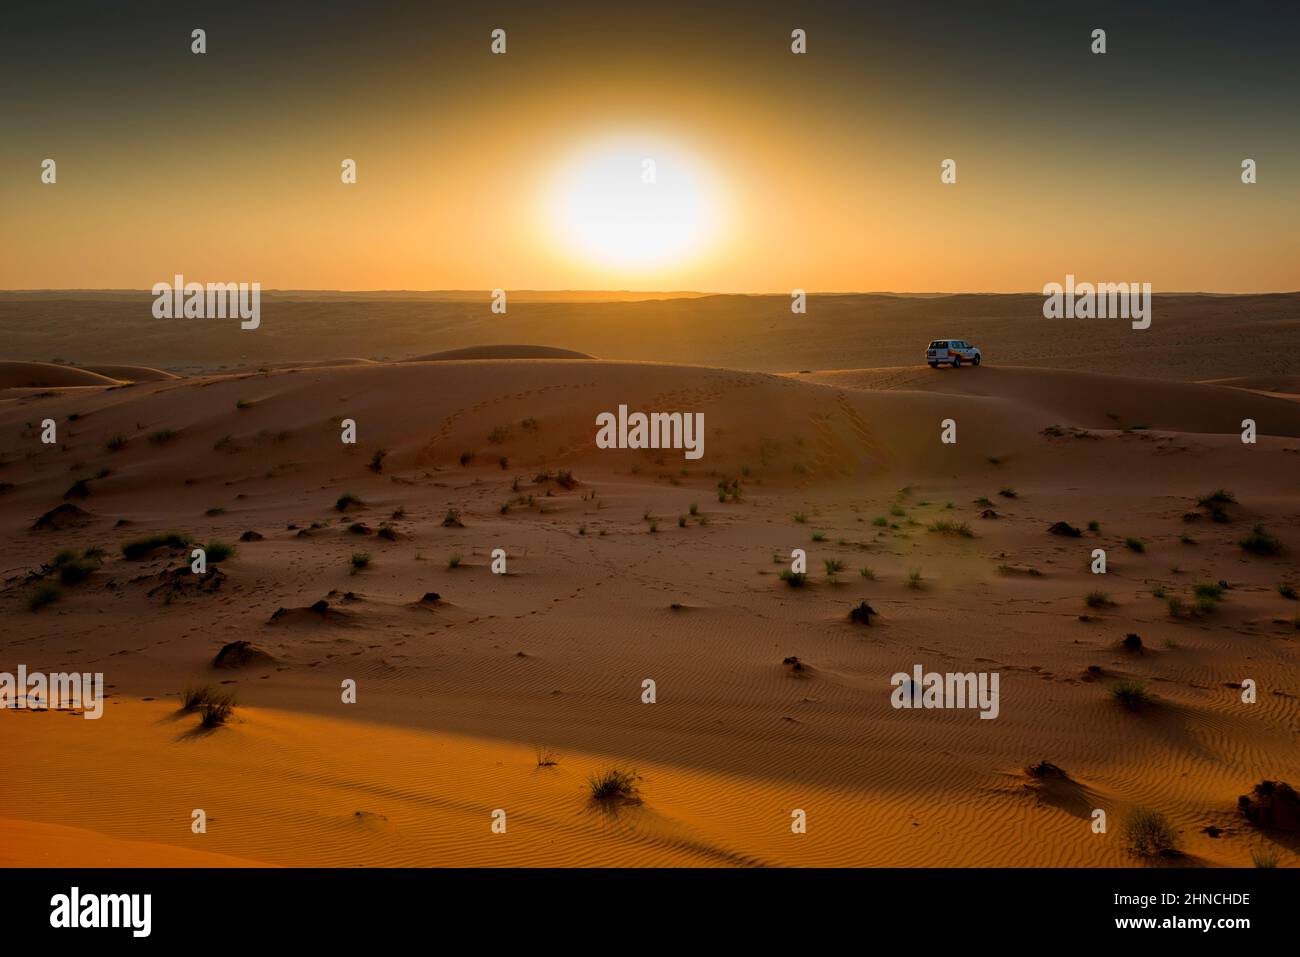 After the trip by off-road car in the sand dunes, we enjoy now the sunset in Wahiba sand, Oman Stock Photo